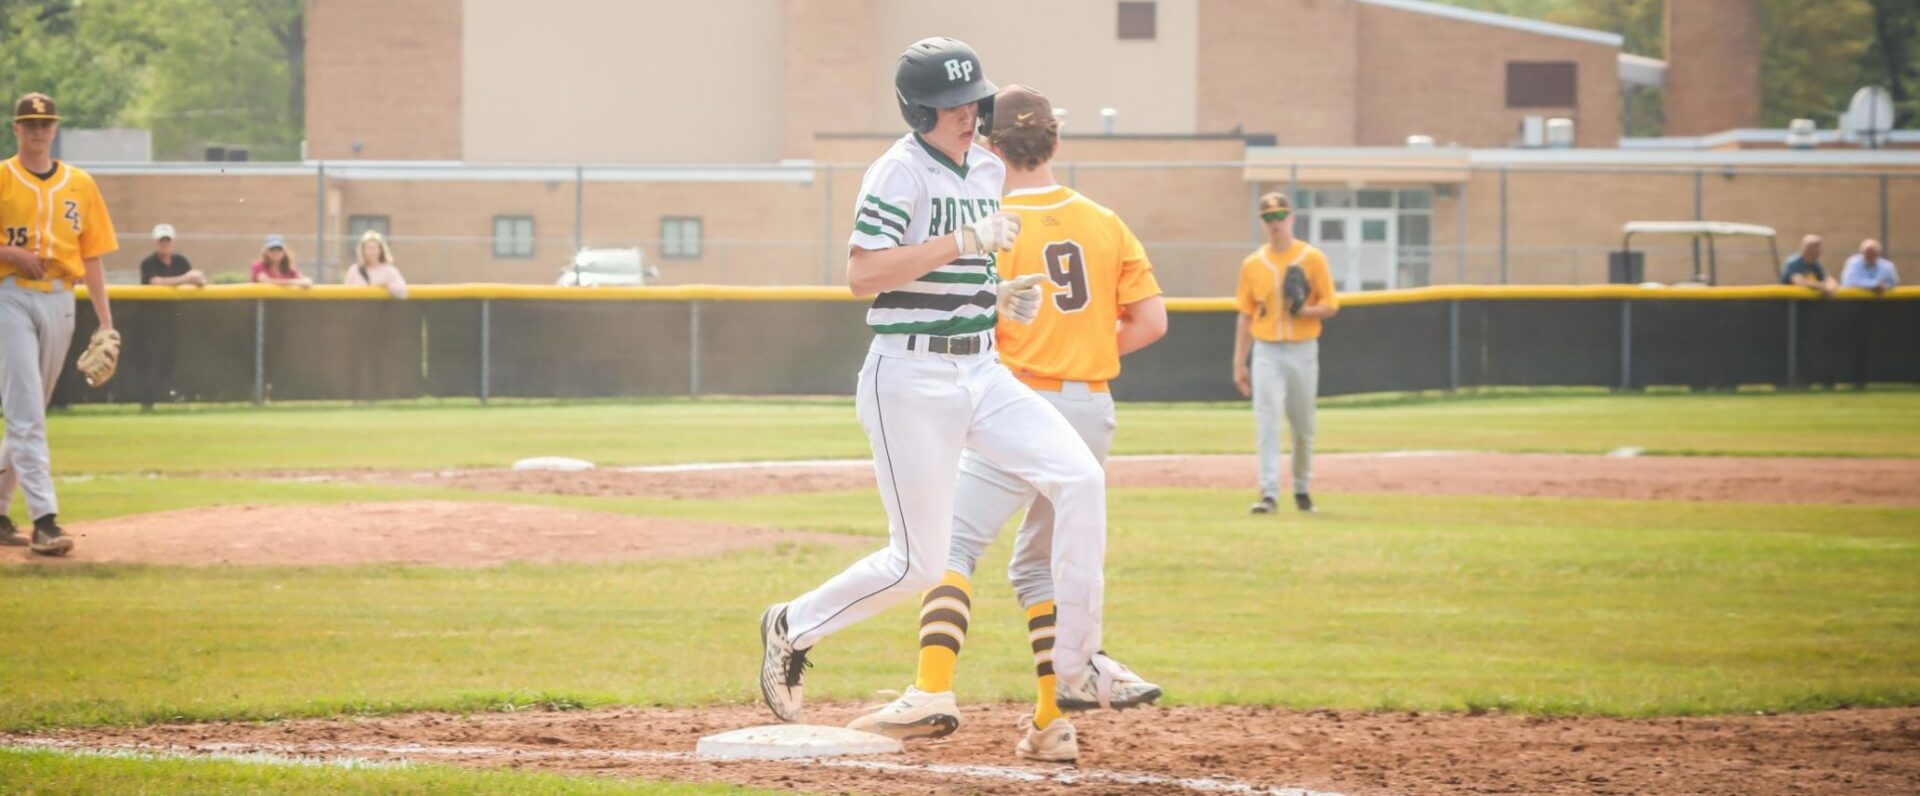 Reeths-Puffer baseball team falls short in its pursuit of a conference title with a double loss to Zeeland East